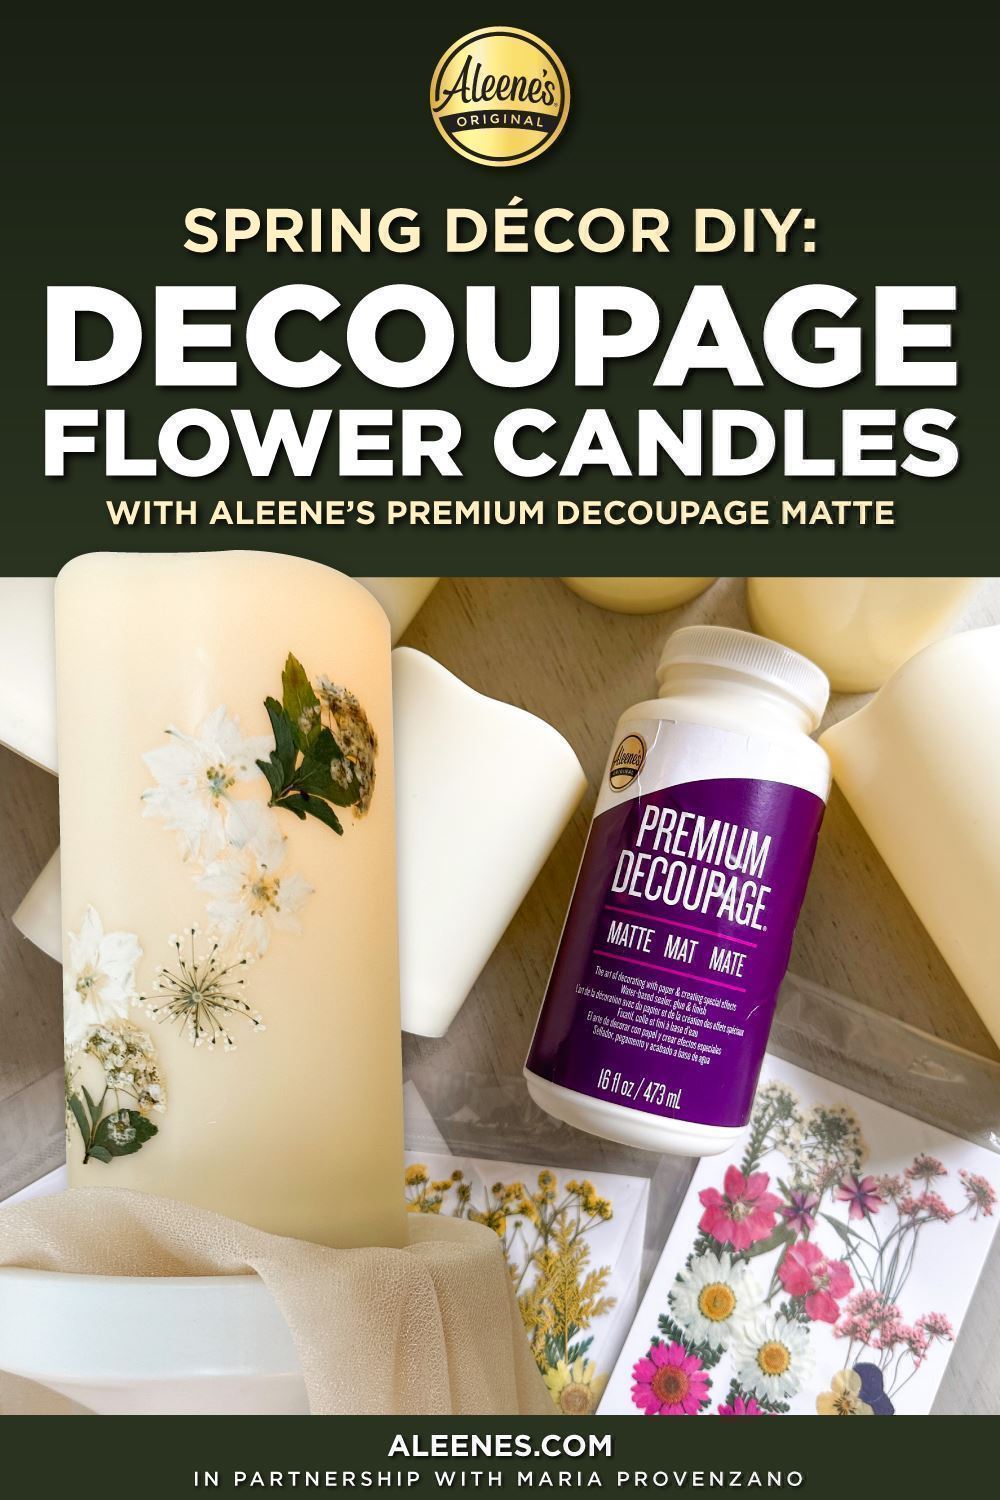 Aleene's Original Glues - How to Make Dried Flower Candles with